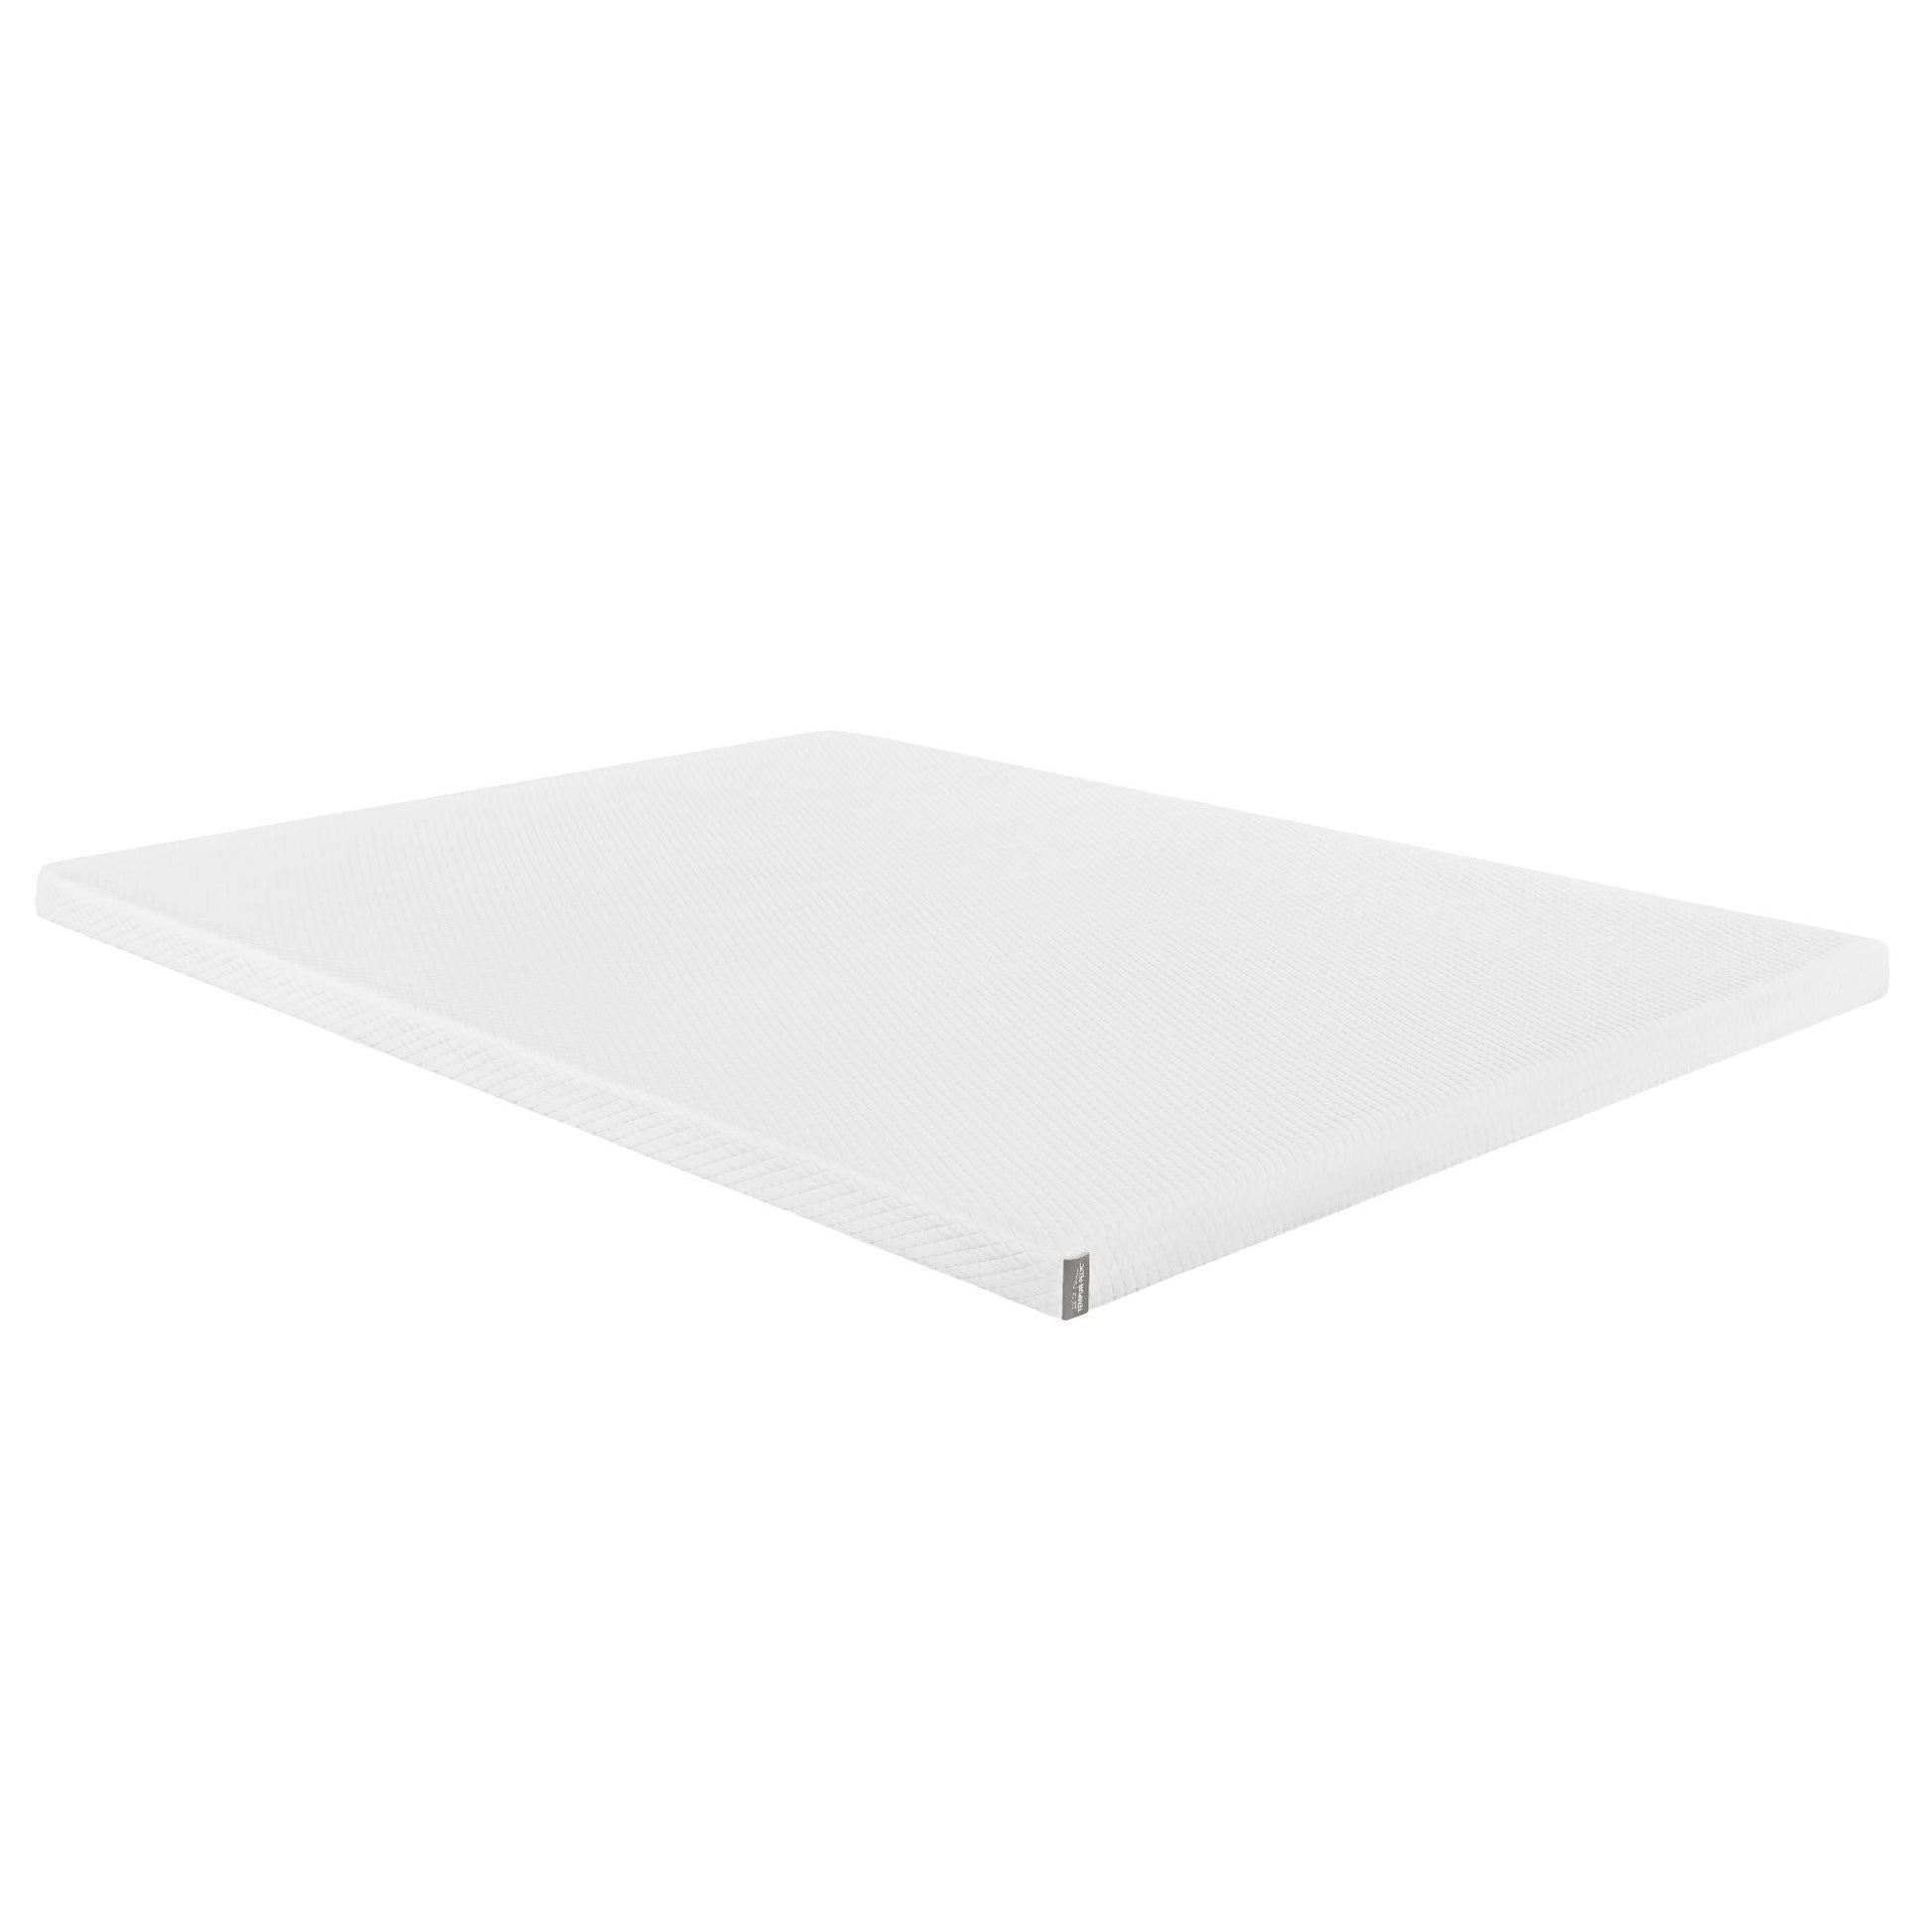 TEMPUR-Adapt® + Cooling Topper On White Background